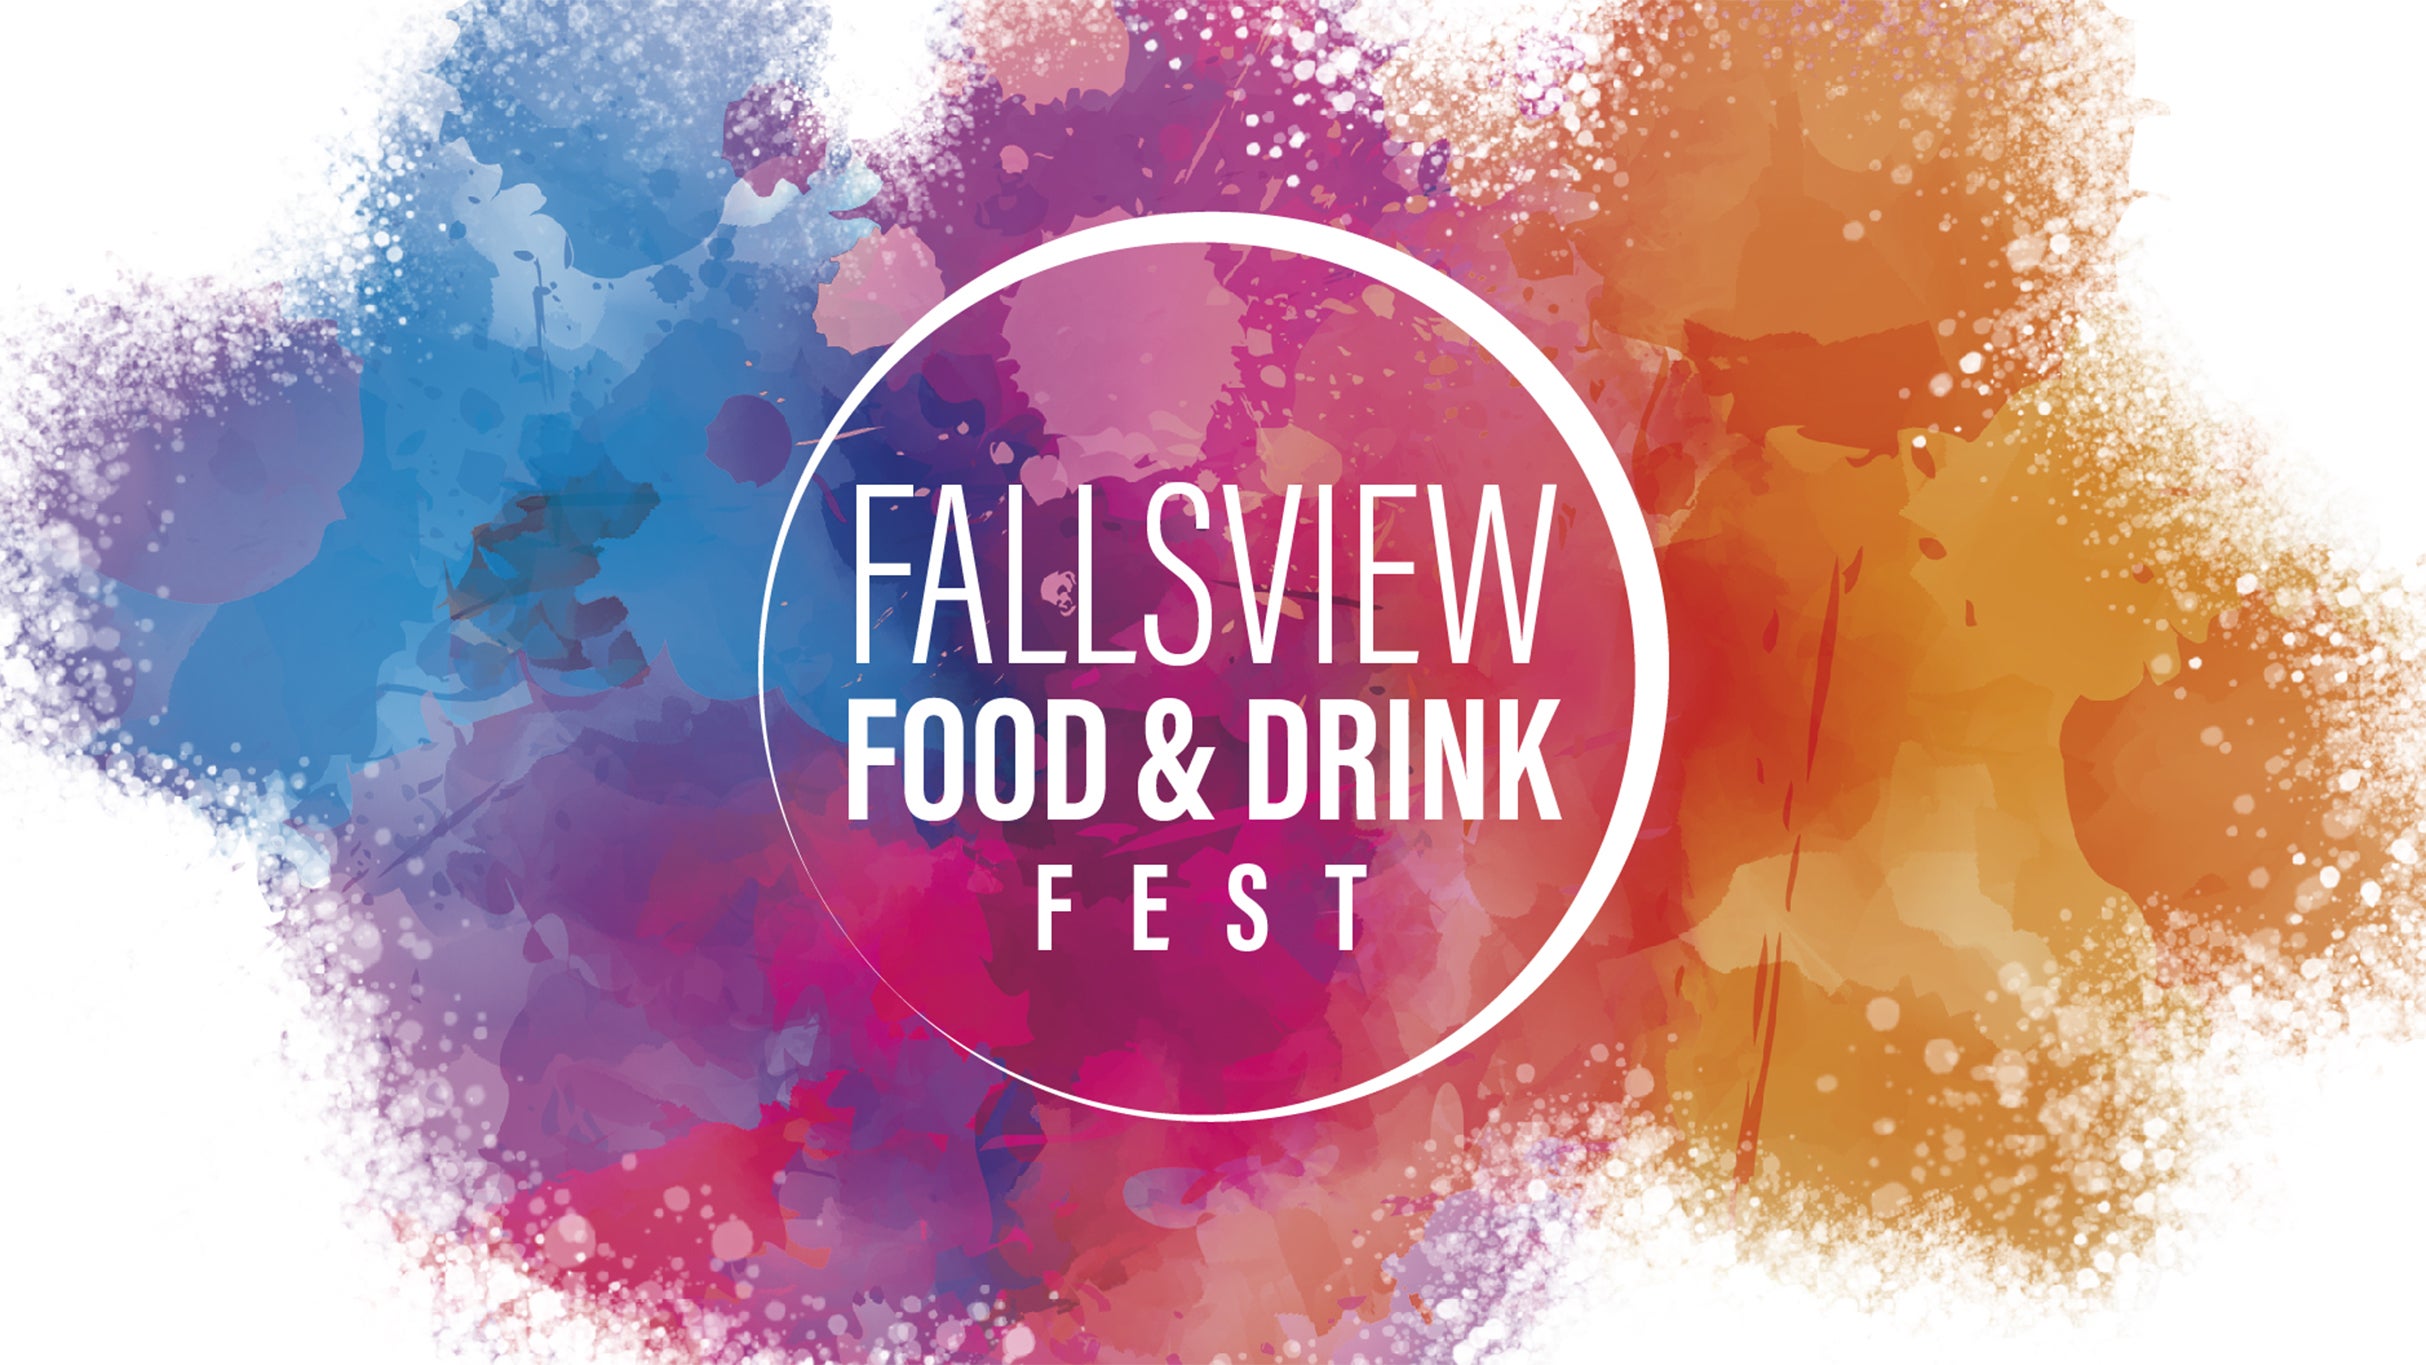 Fallsview Food & Drink Fest - Brunch With Mary Berg in Niagara Falls promo photo for Momentum presale offer code